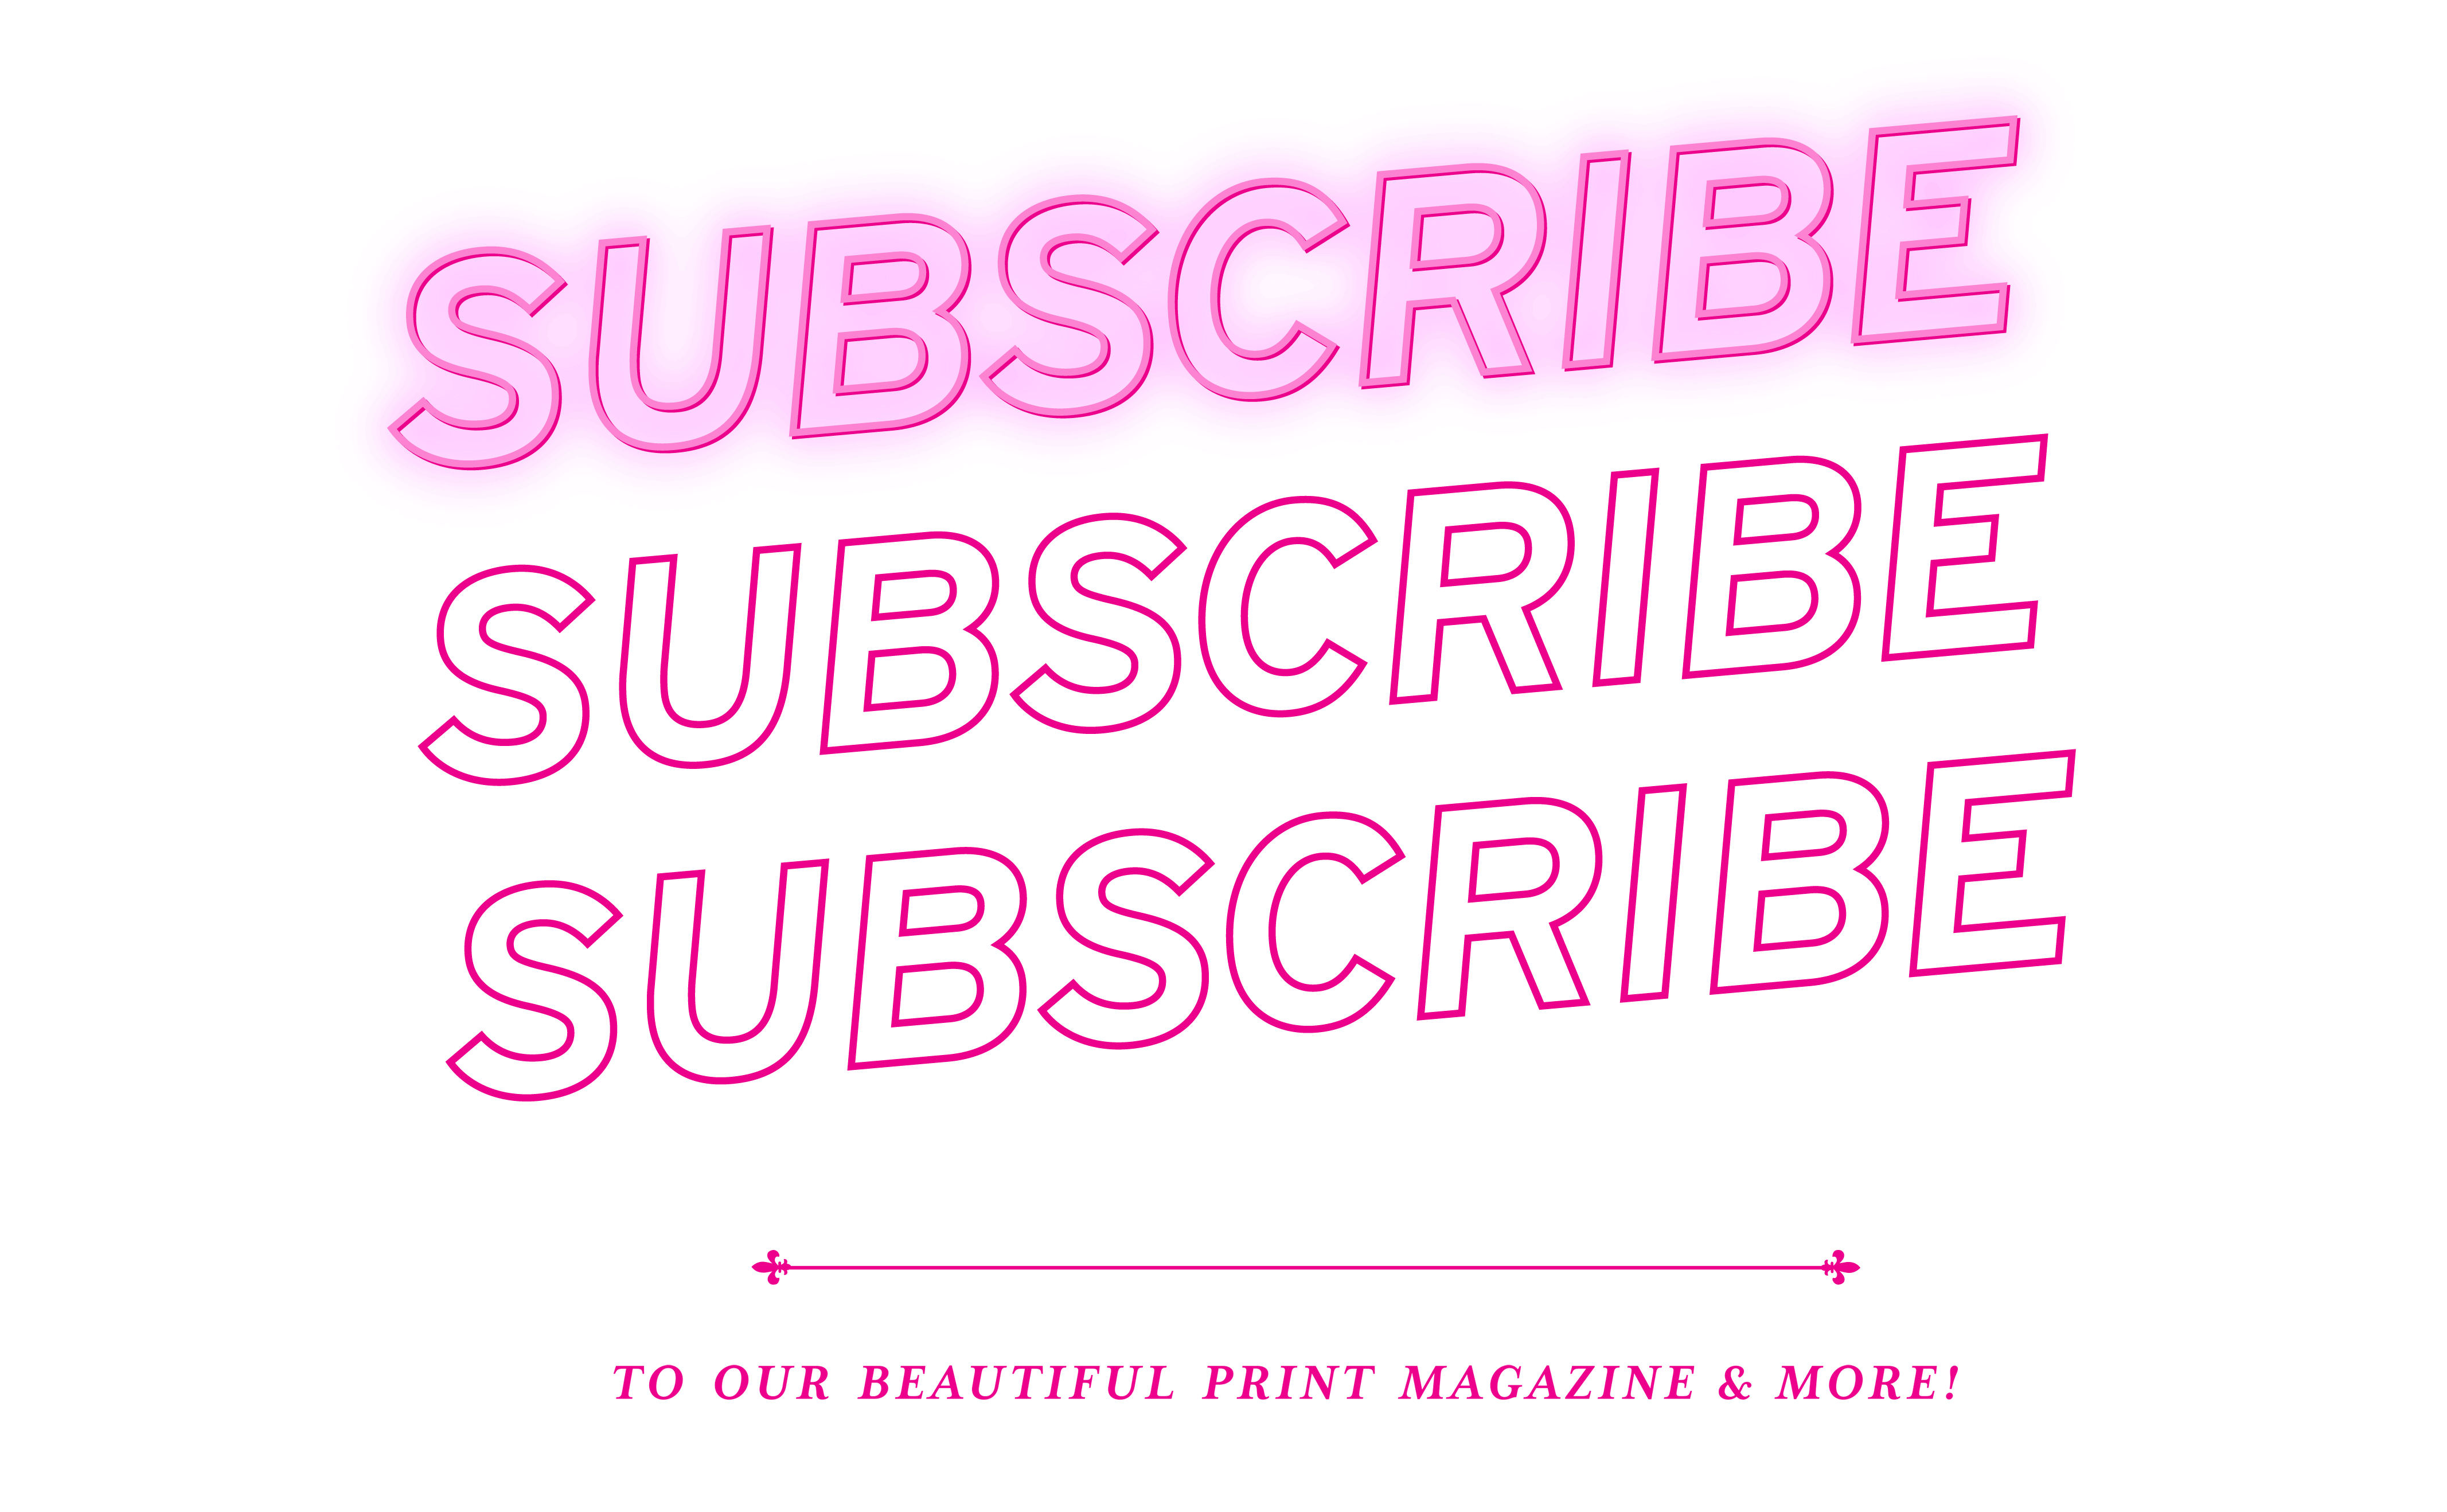 Subscribe to our magazine!